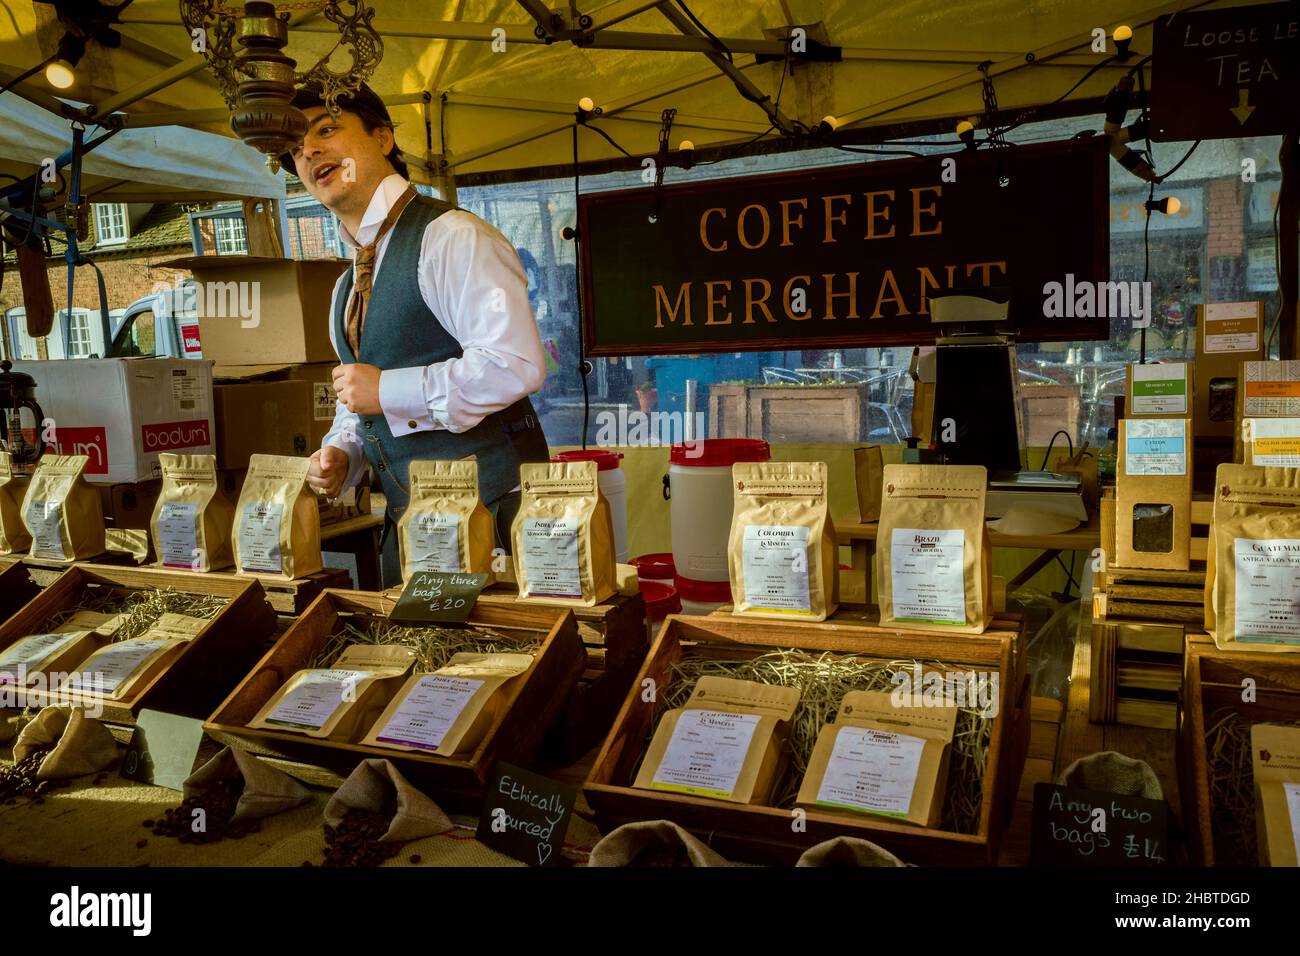 Stratford upon Avon, UK - A Coffee Merchant at the Victorian Christmas Market wearing period clothing. A variety of coffee beans are on offer. Stock Photo